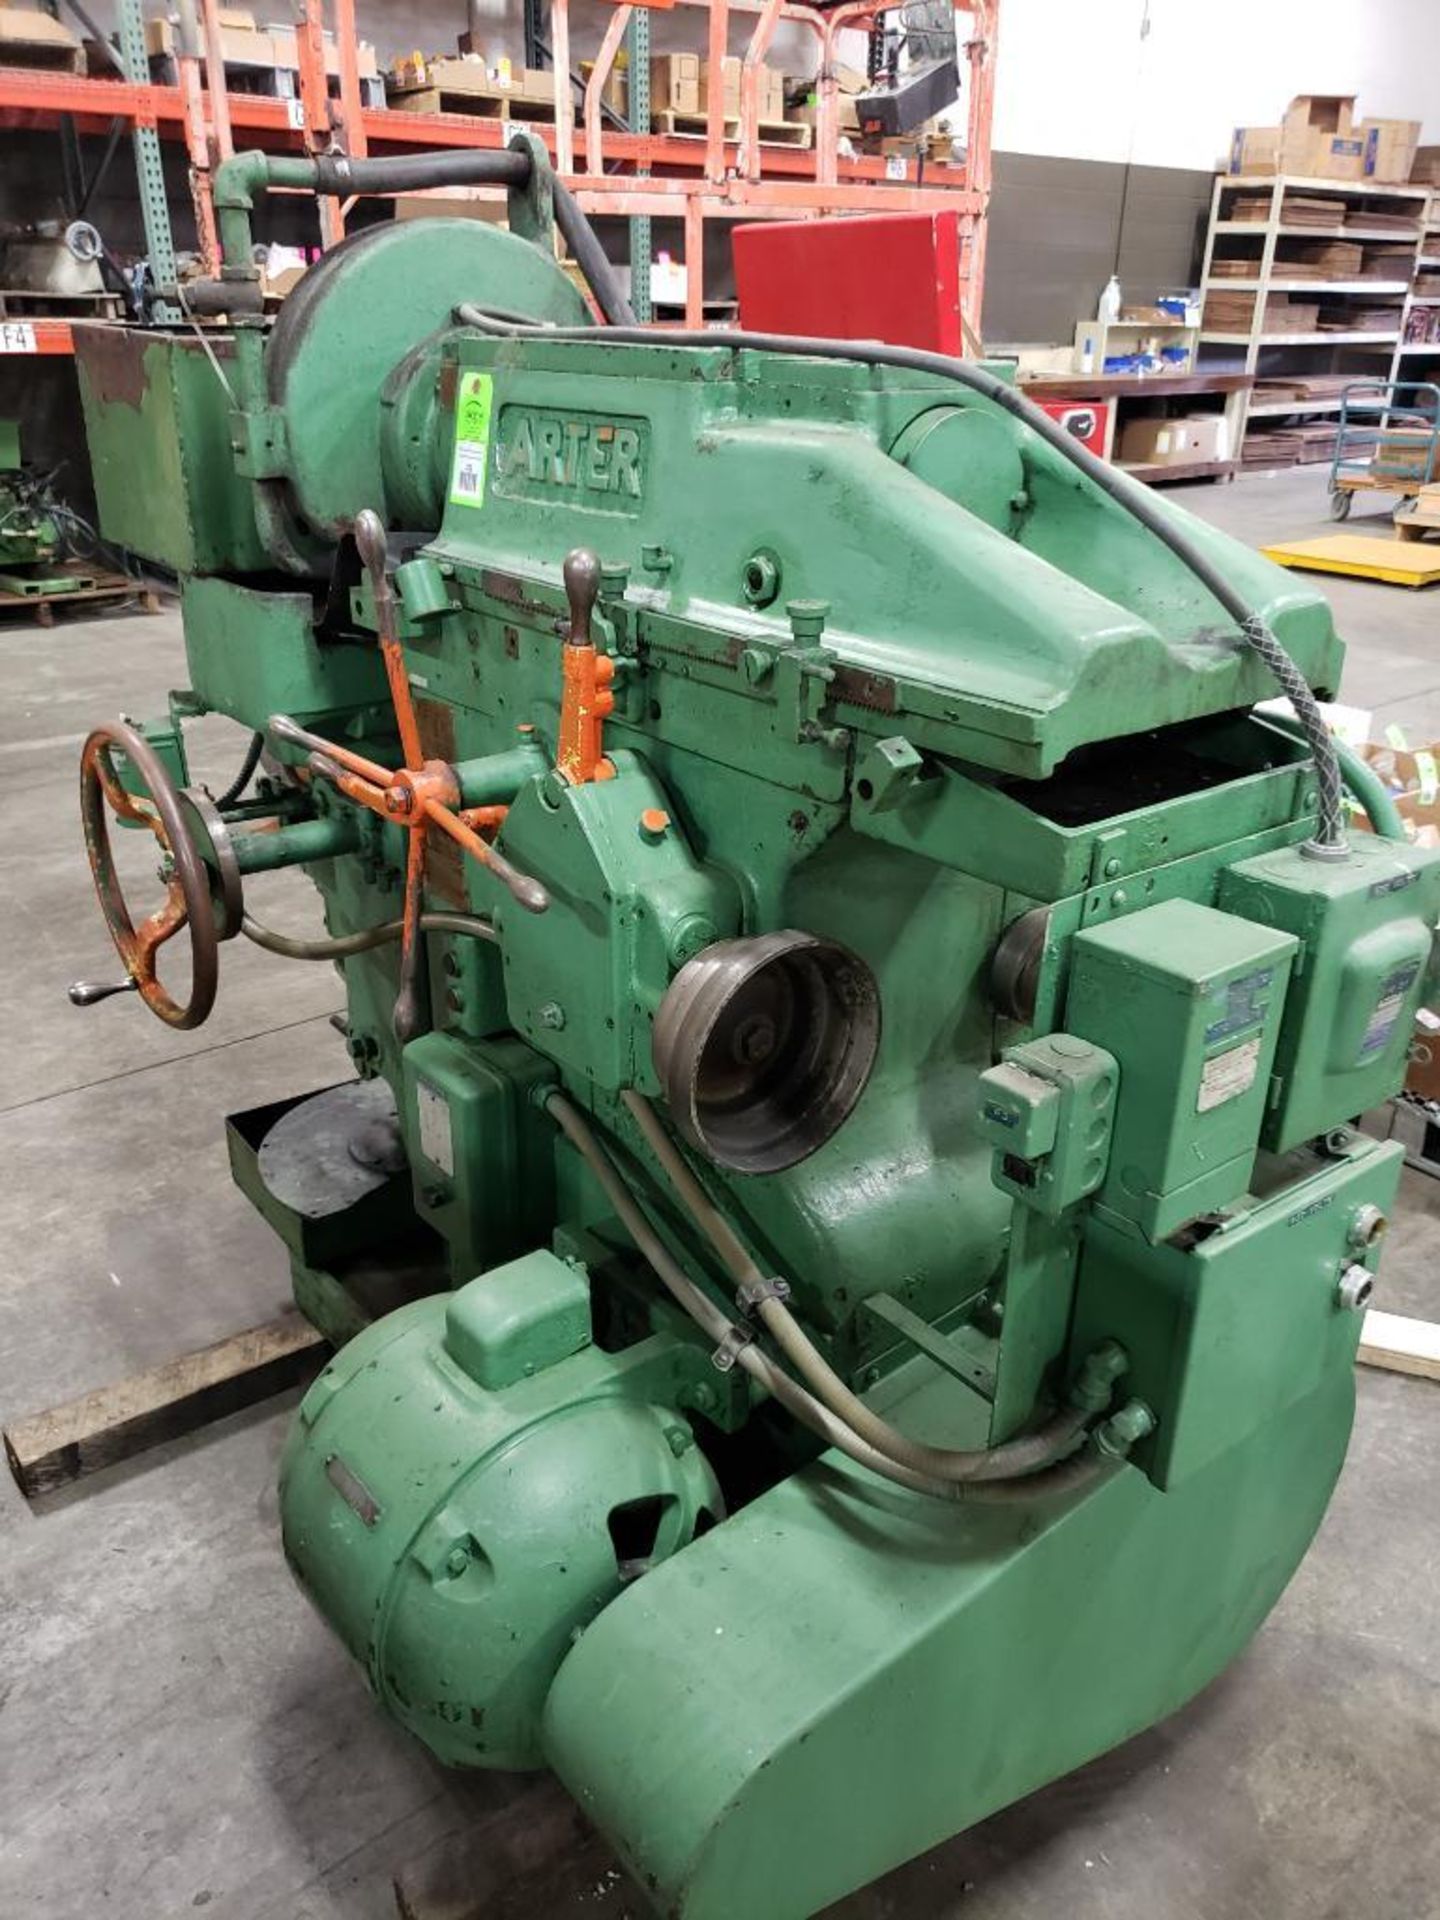 Arter Winding Machine Company A-1-8 horizontal spindle rotary surface grinder, 230V Magnetic Chuck. - Image 19 of 23